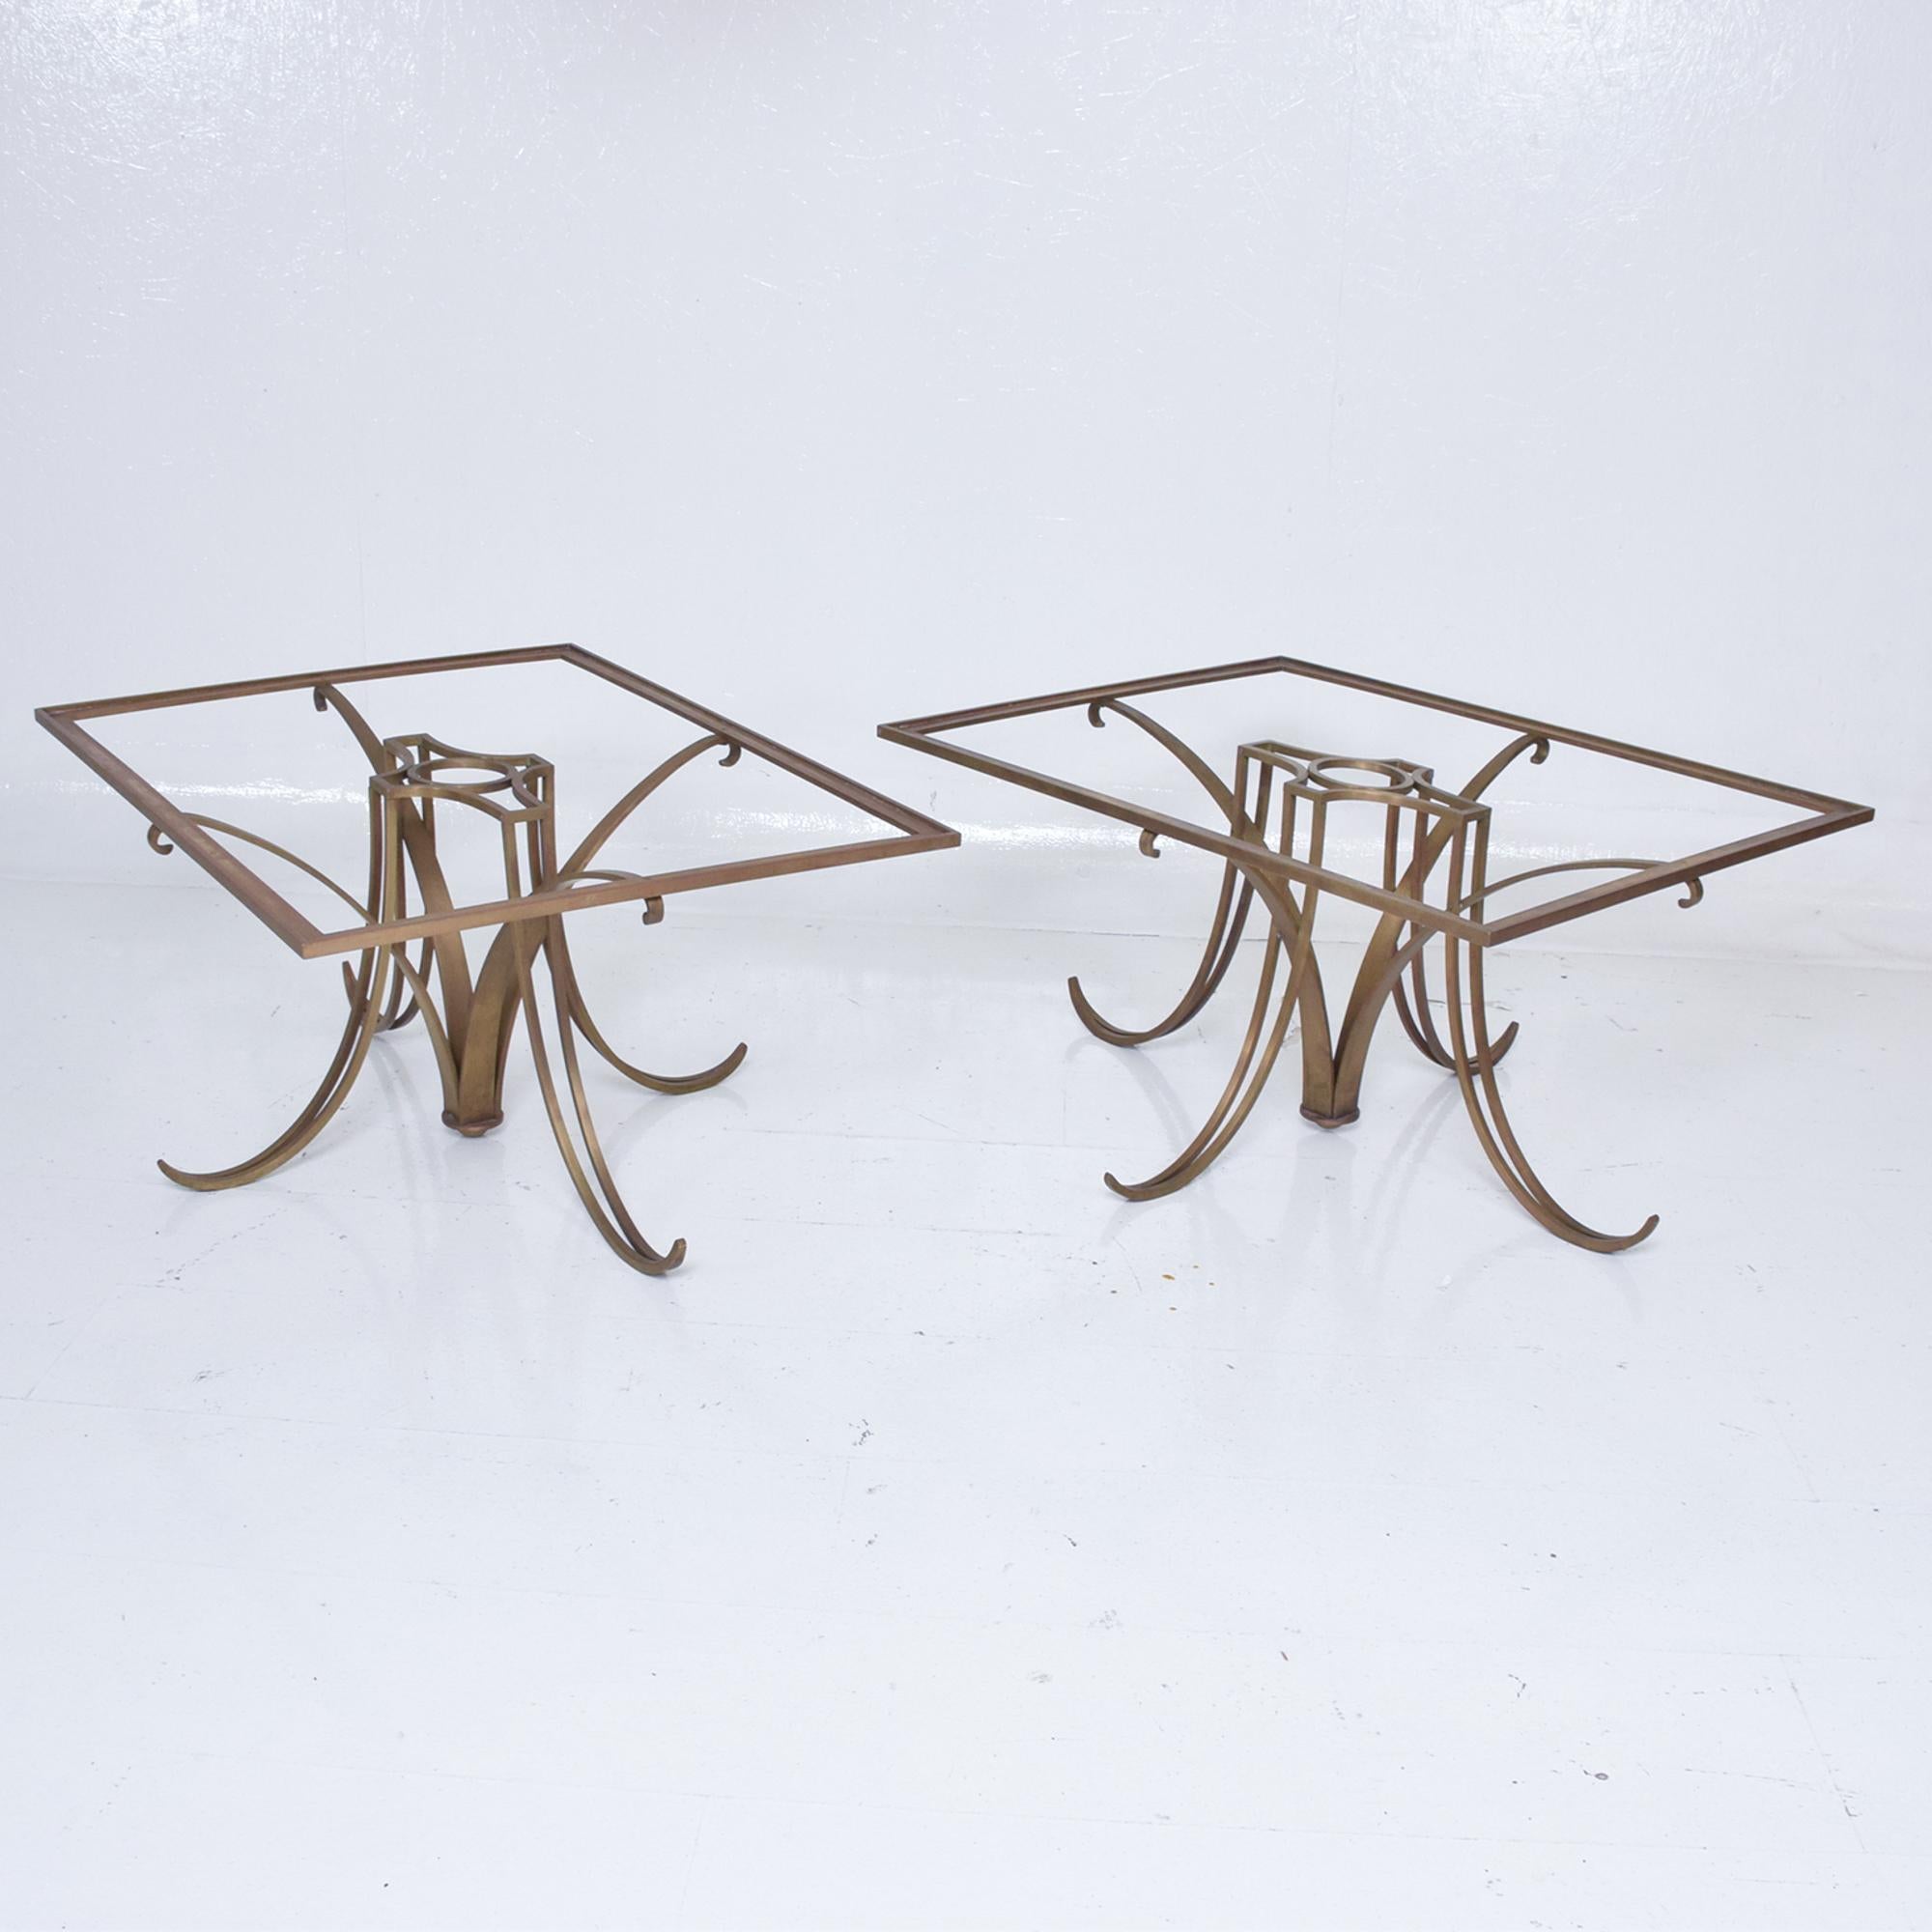 Lovely pair of Mexican modernist brass side tables by Arturo Pani.
Mexico, circa 1950s.
Solid brass sculptural shape. Exquisite quality.
Dimensions: 15